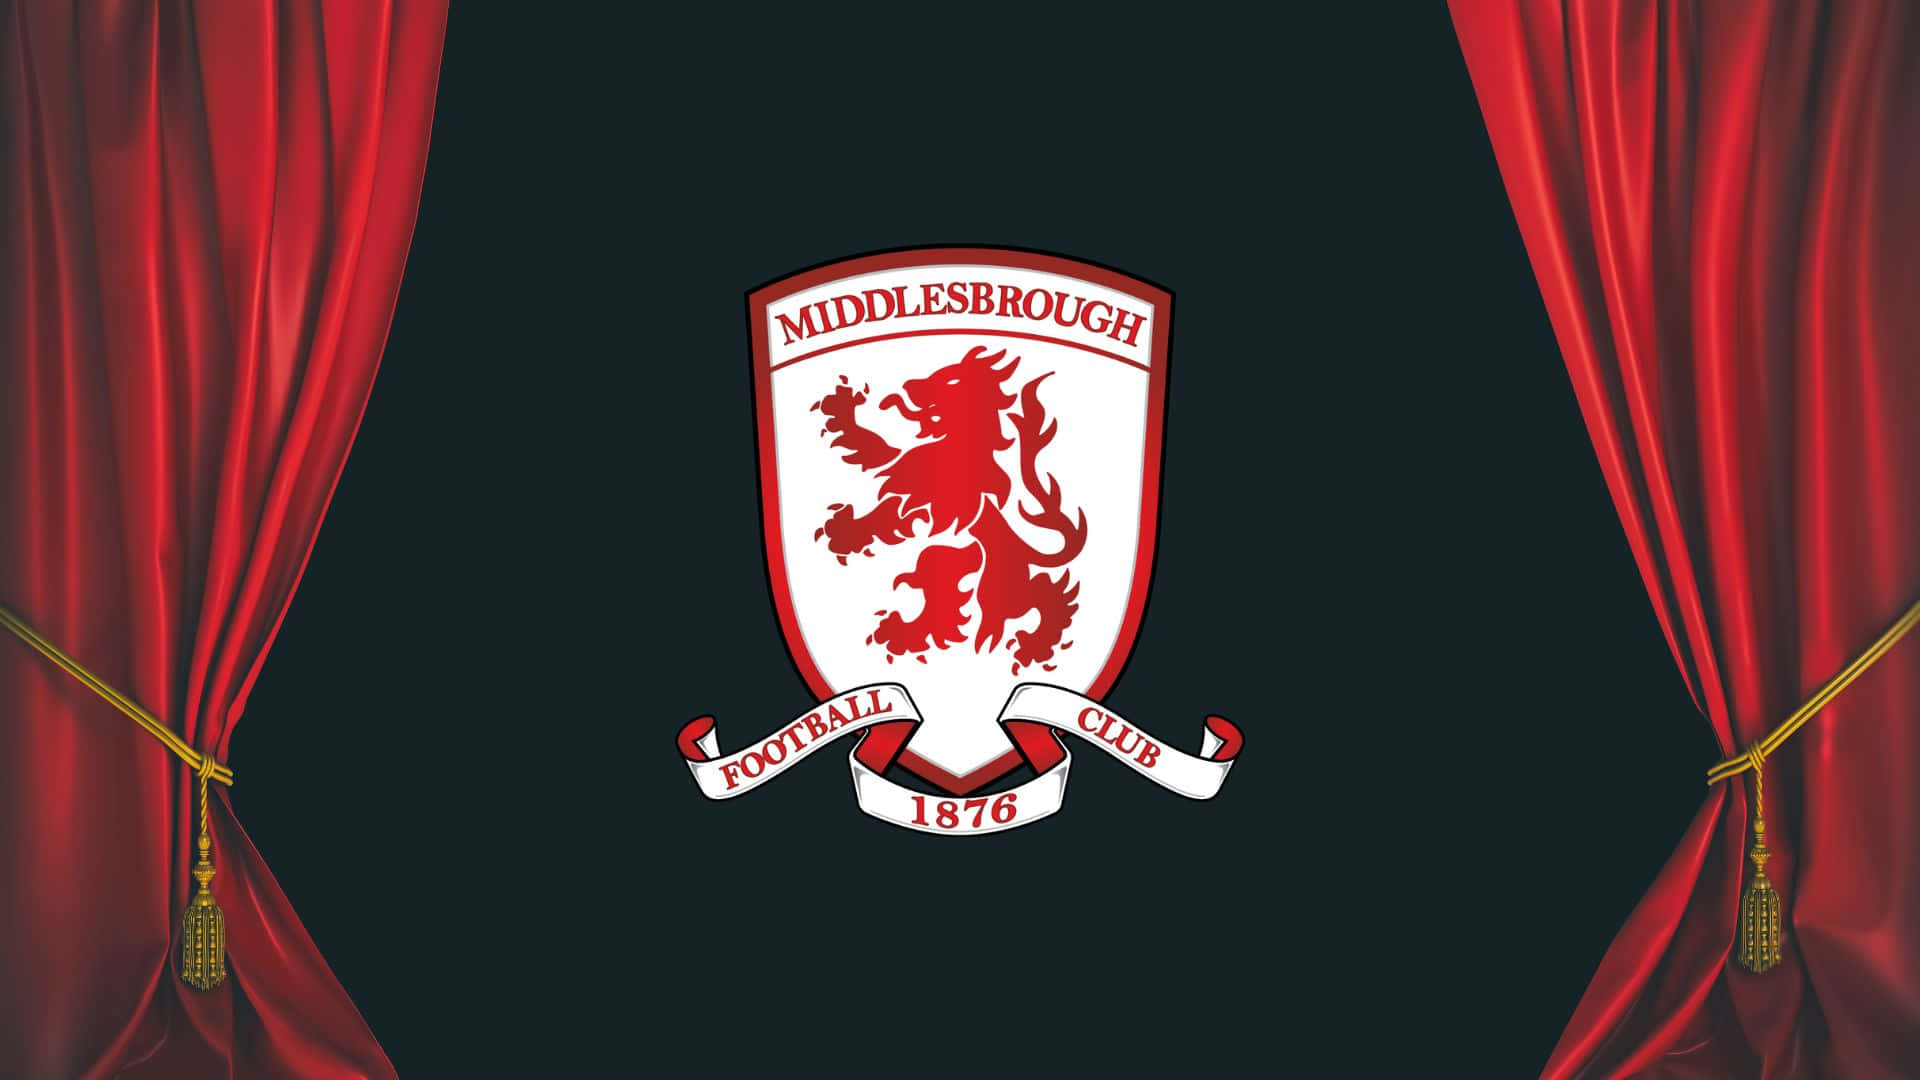 100 X Middlesbrough Stickers Based on Poster Shirt Scarf Pin - Etsy Israel